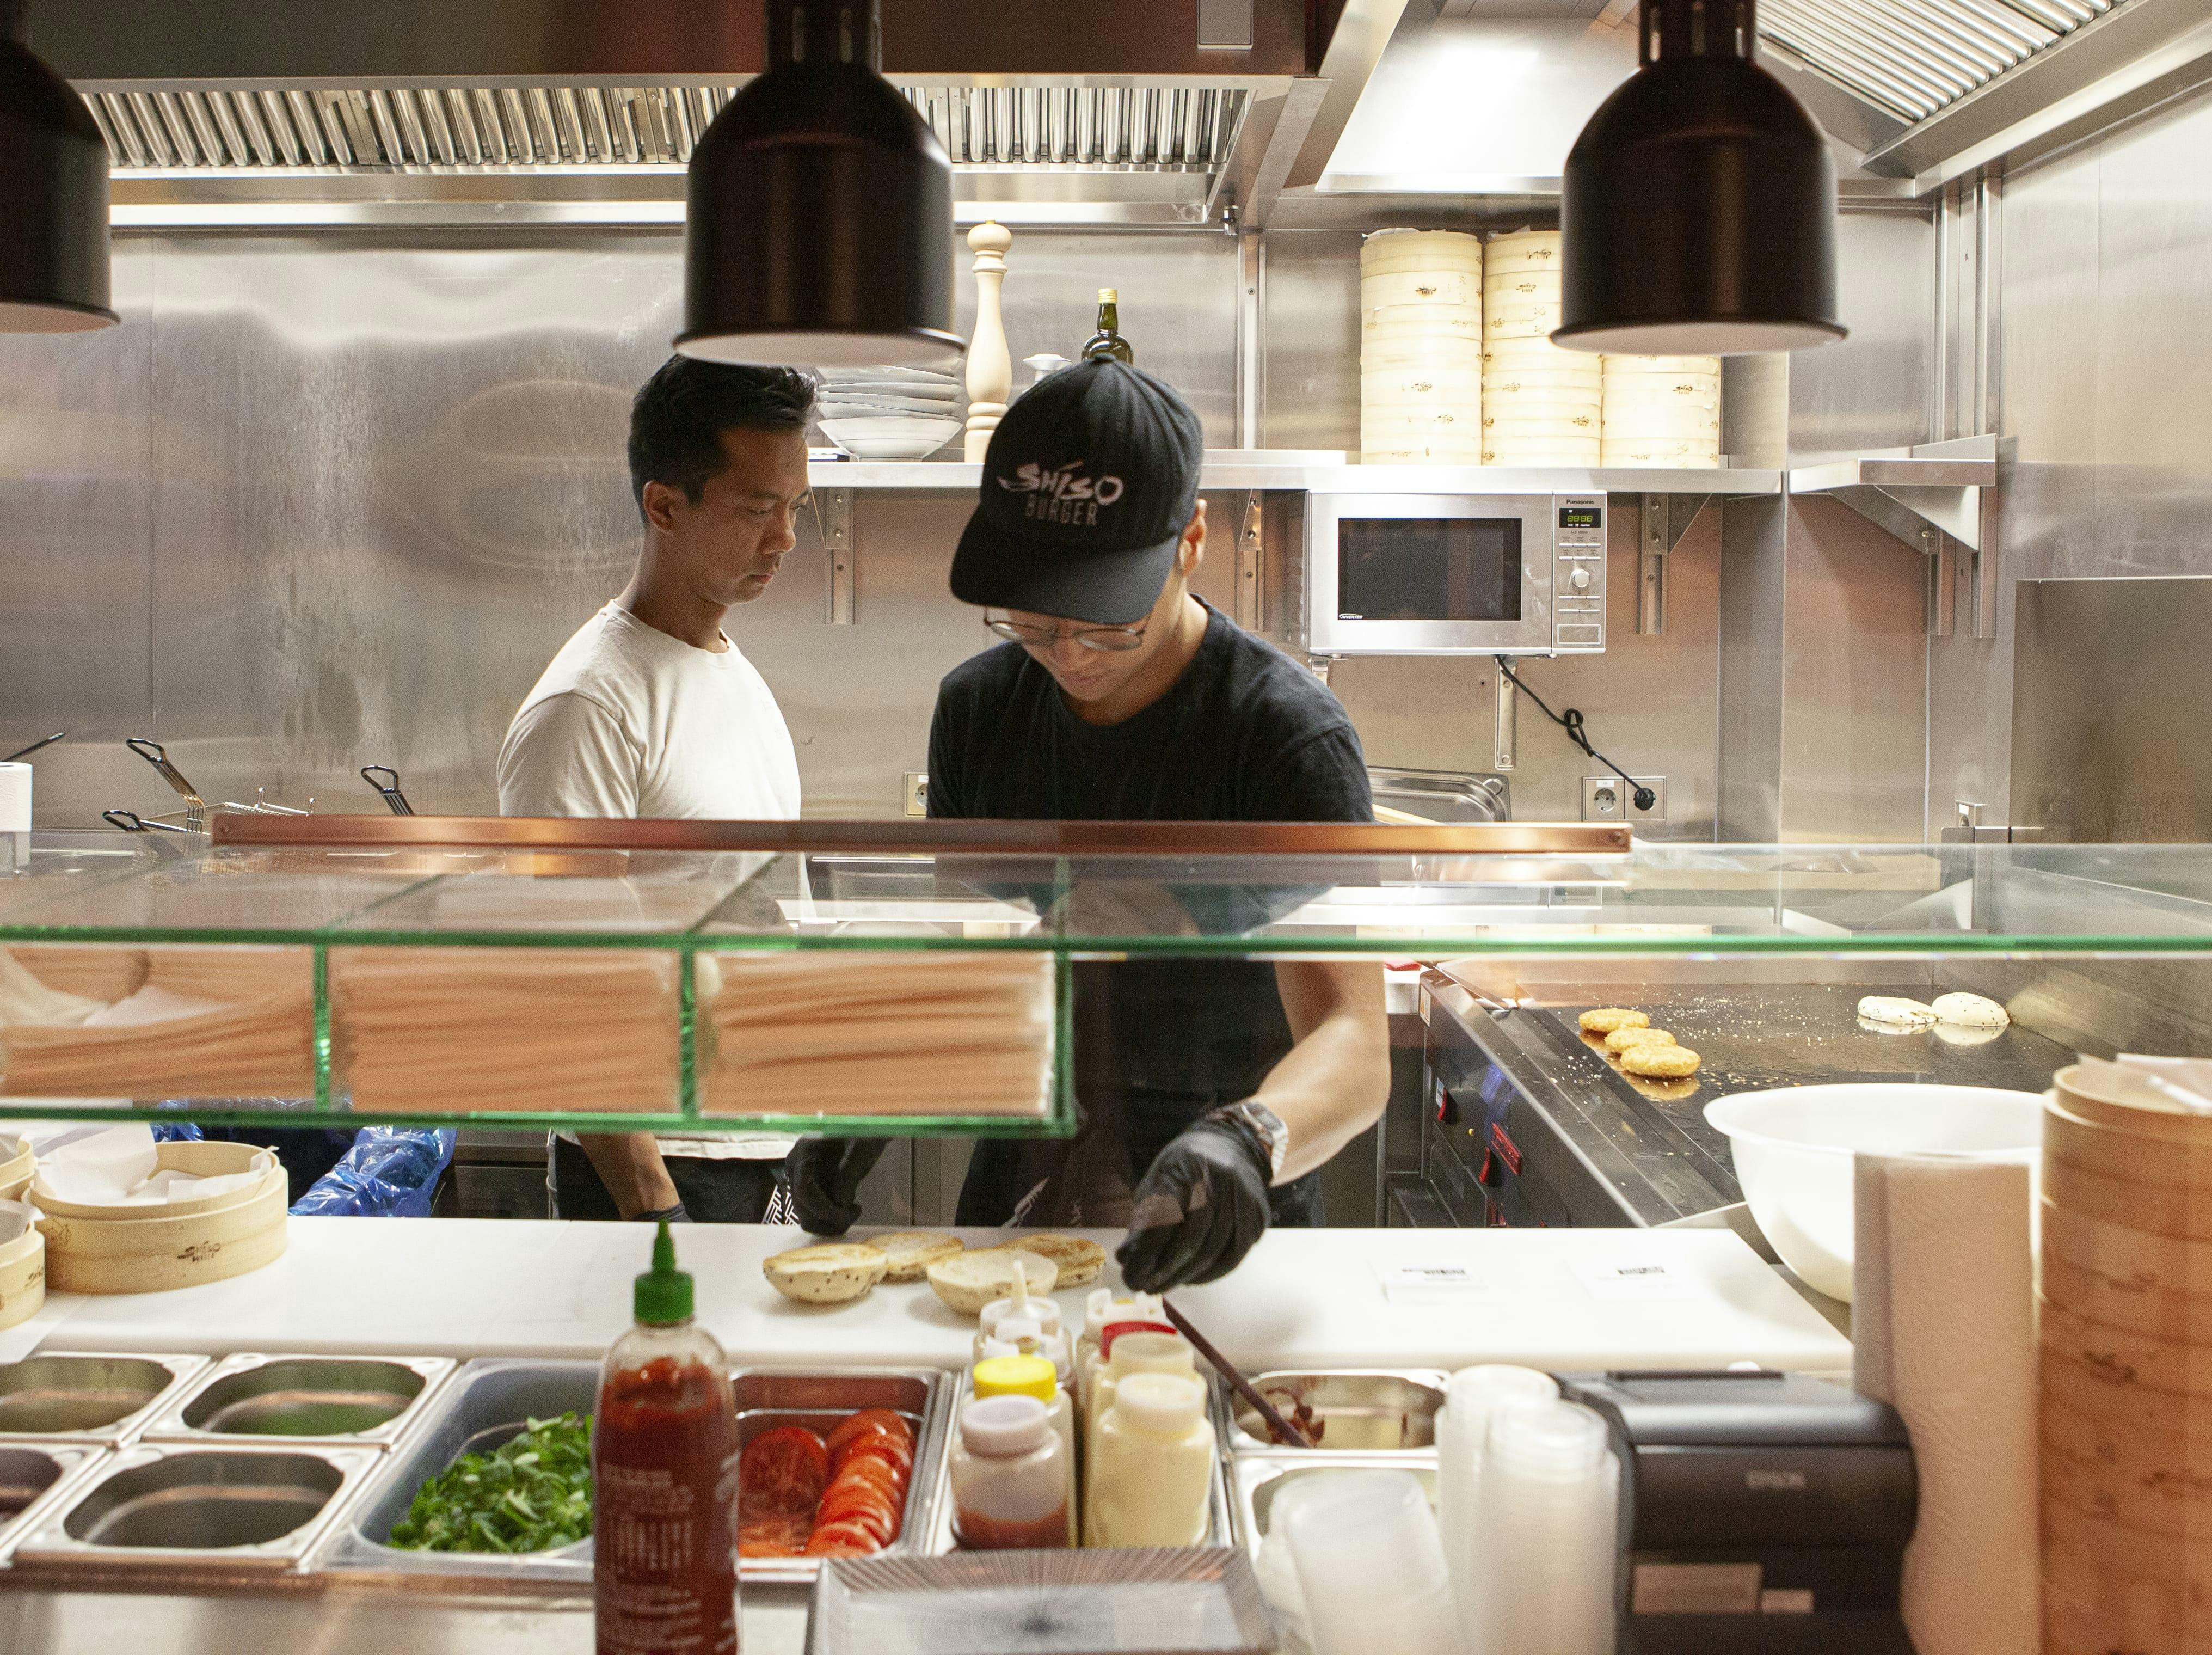 The Shiso Burger kitchen crew at work